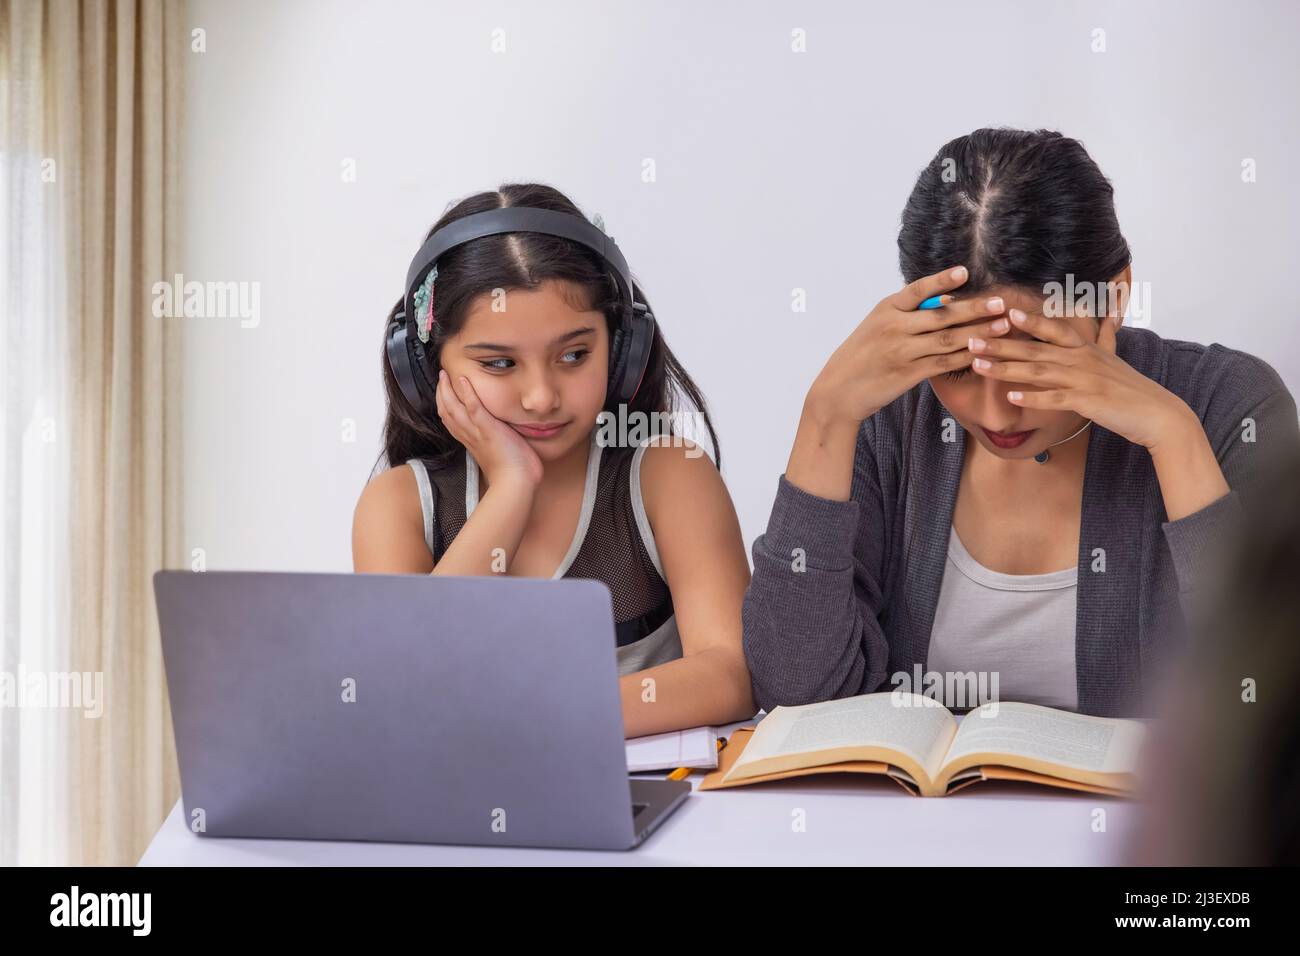 Girl studying online using laptop and mother reading book with hands on head Stock Photo